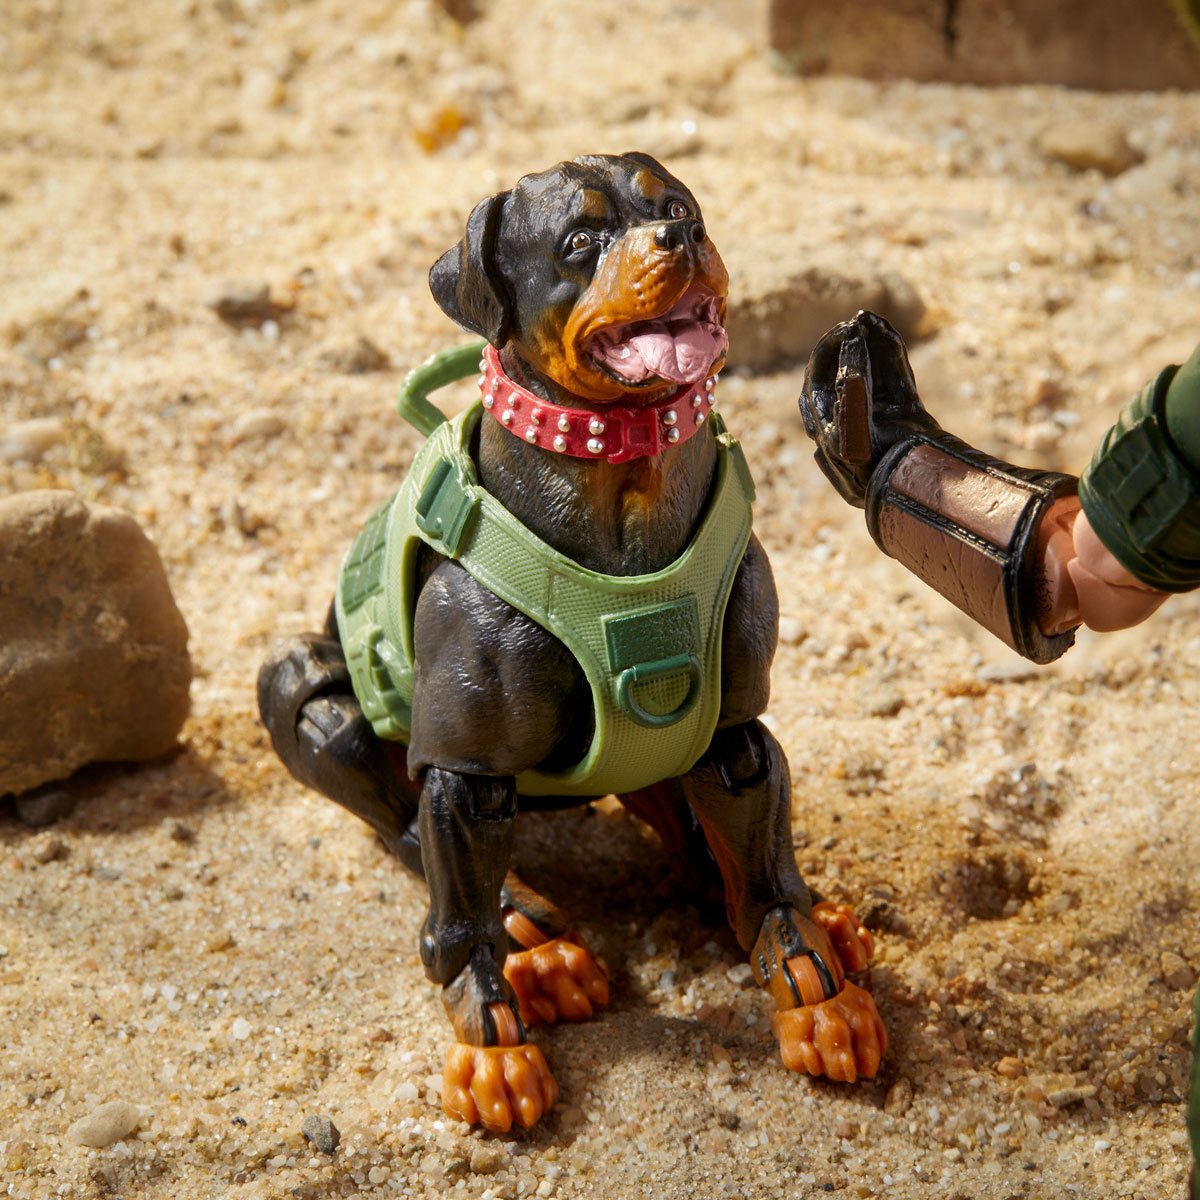 Pre-Order - G.I. Joe Classified Series Deluxe Mutt and Junkyard 6-Inch Action Figure